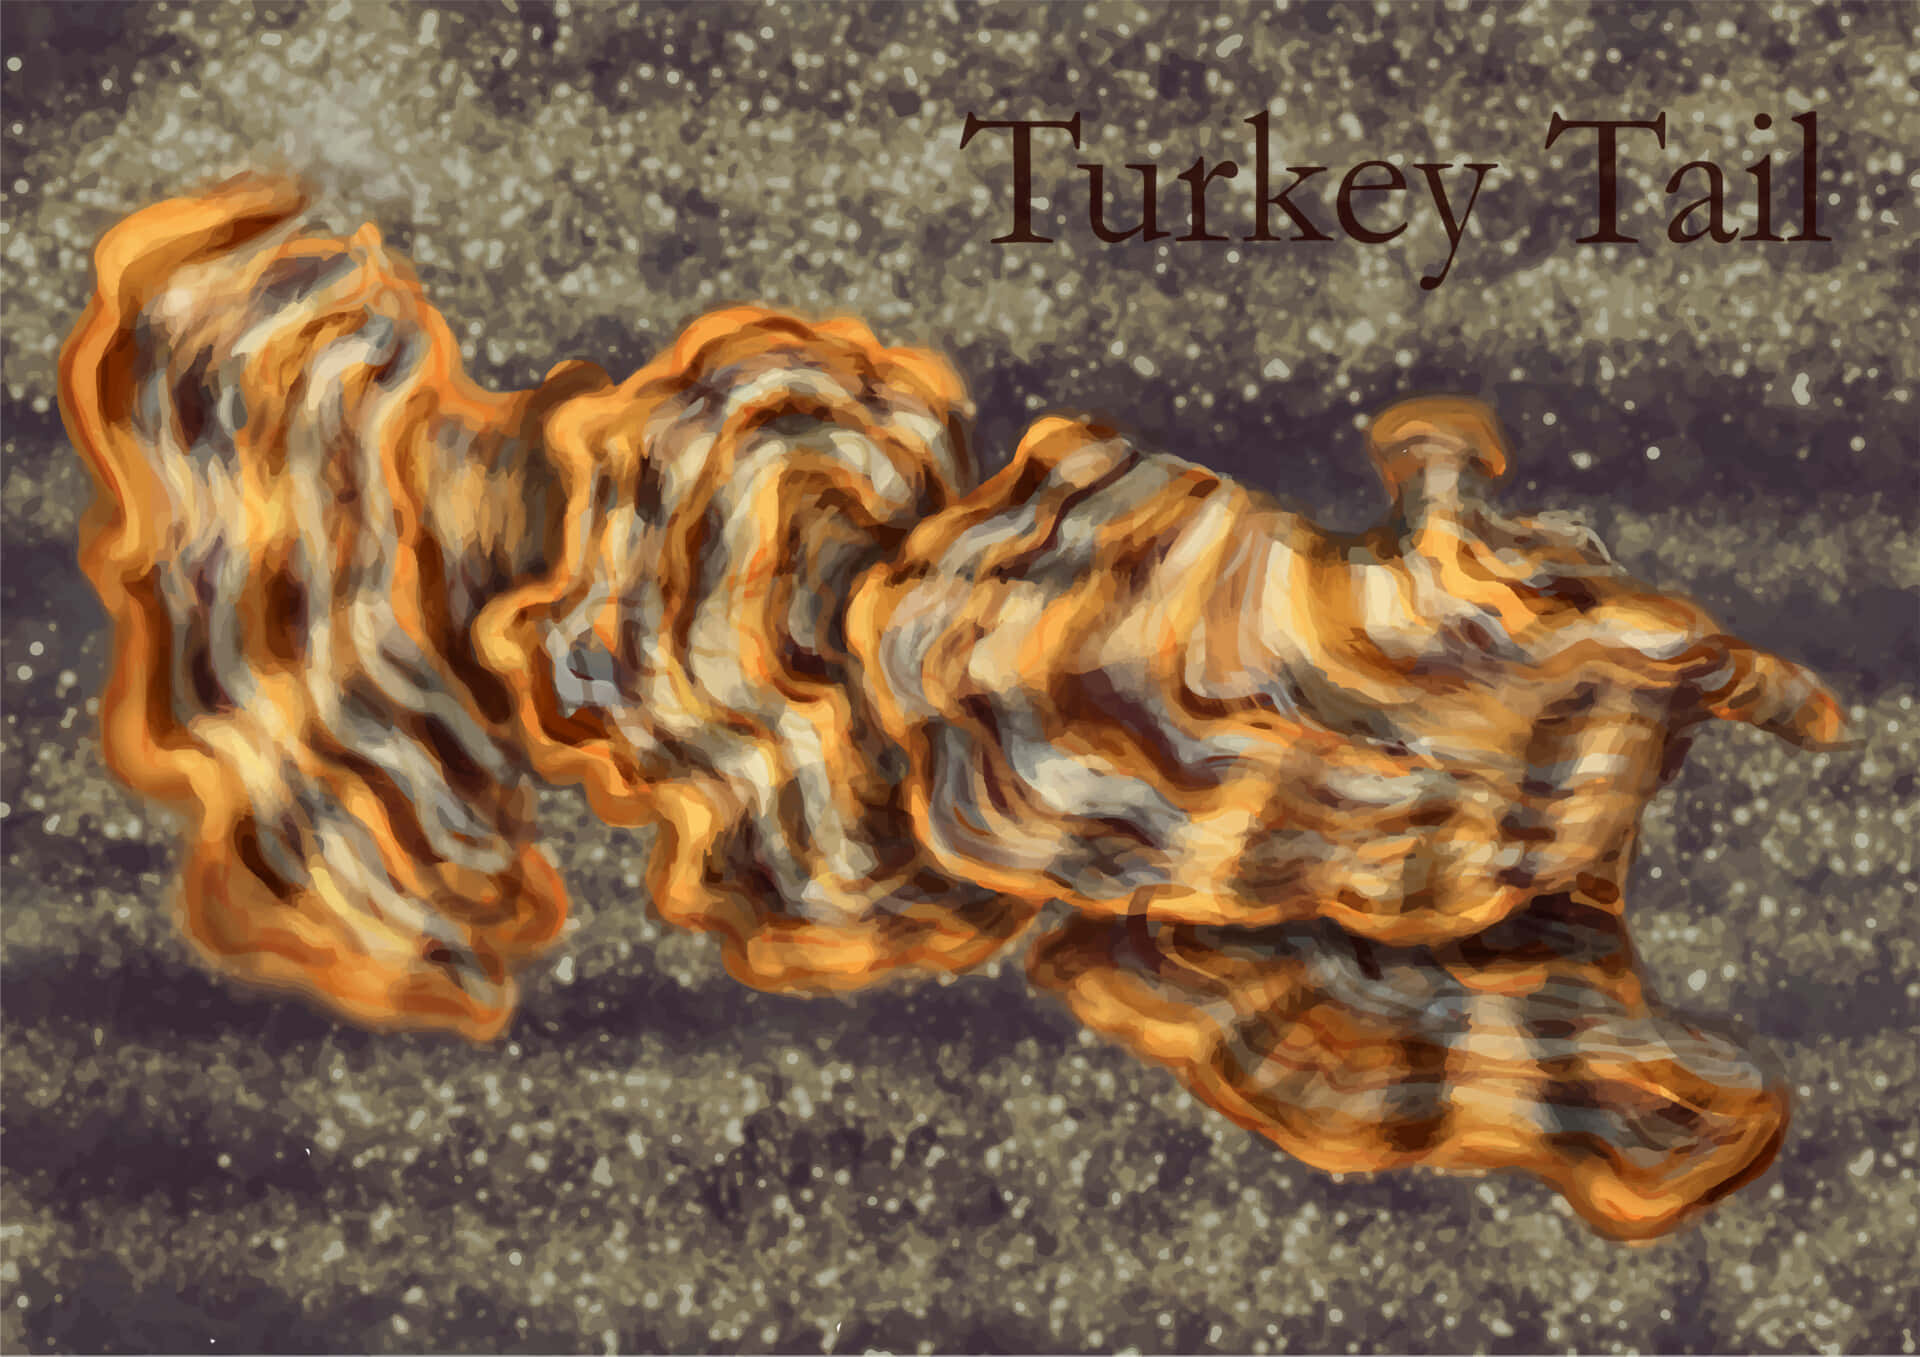 Cryptic Turkey Tail Painting Wallpaper